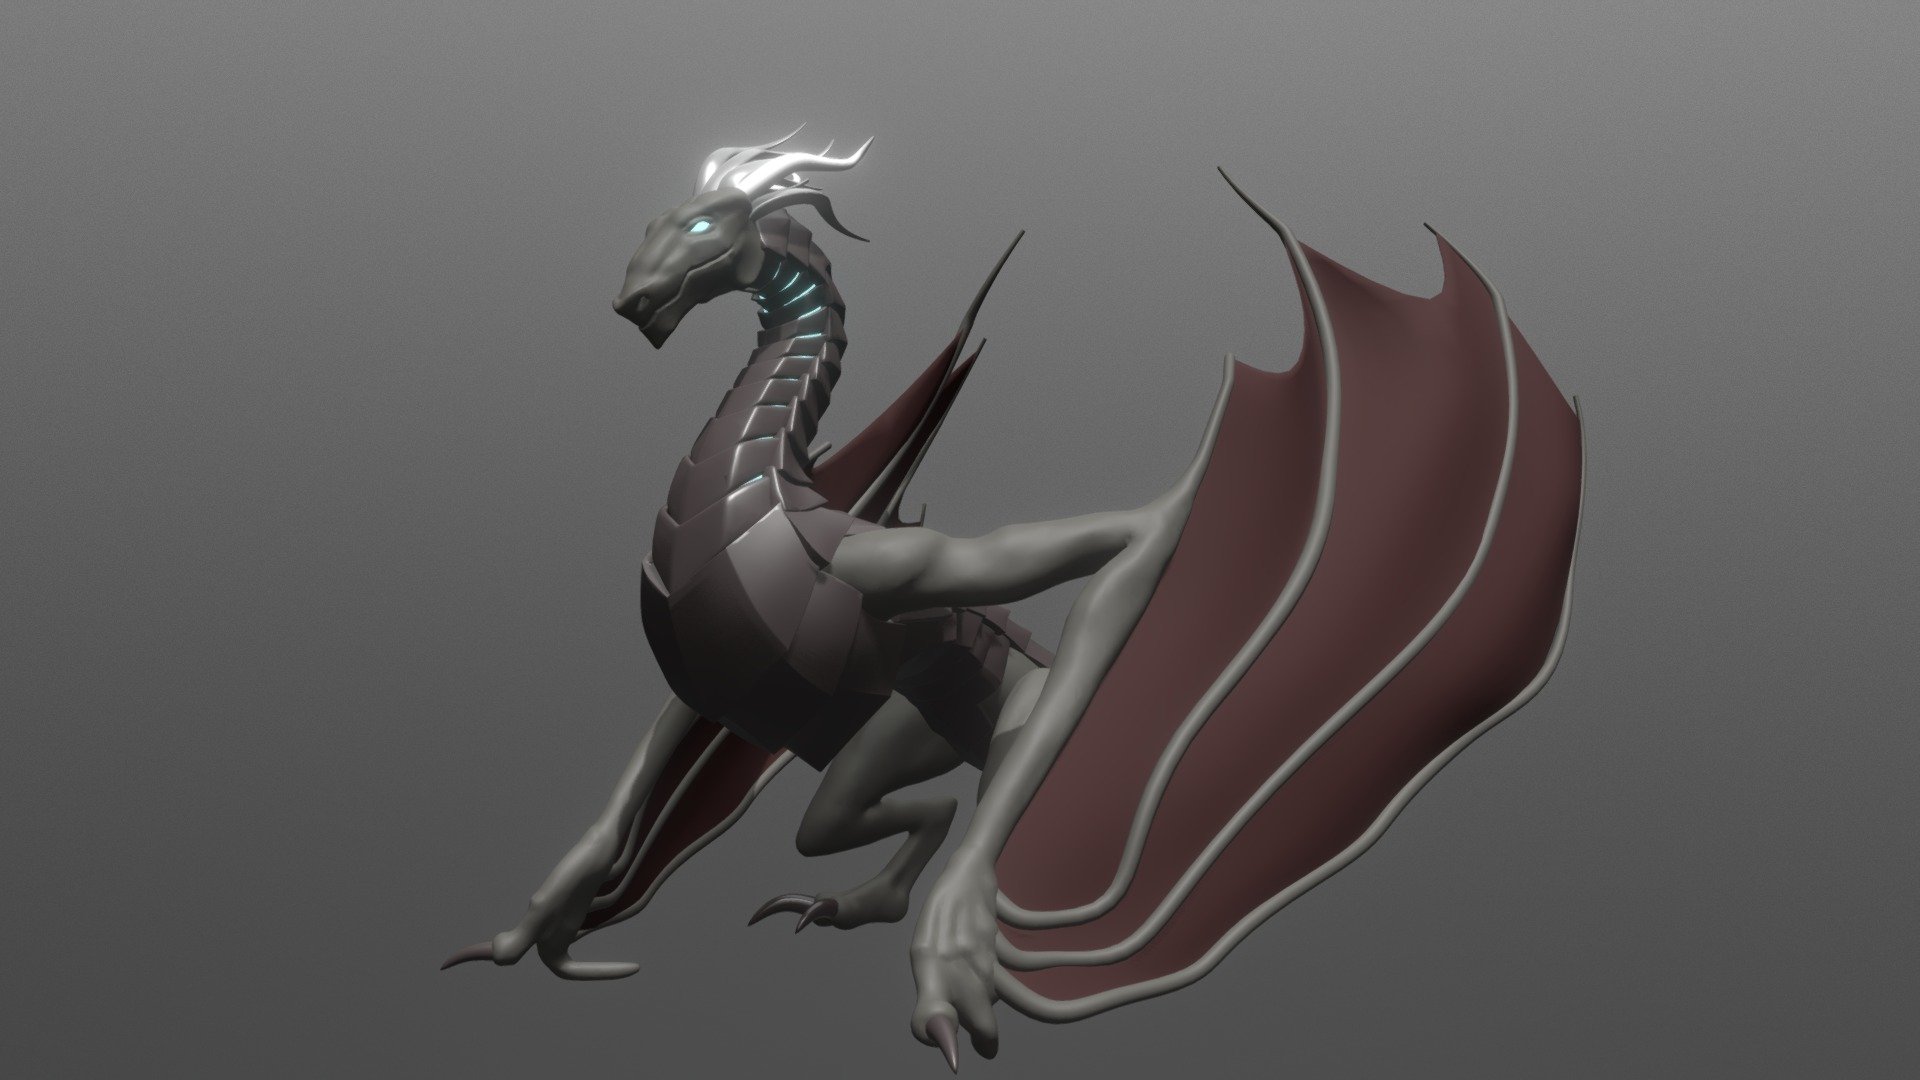 I tried to do what I could to recreat the awesomeness that is Sam Keiser's concept art:

http://www.sam-keiser.com/img/design_16.png

Although I didn't have time to do it justice, I think it came out pretty nicely thanks to Sam's design :) - 26 Sculpt January: Dragon (Zhafir) - 3D model by mvick13497 3d model